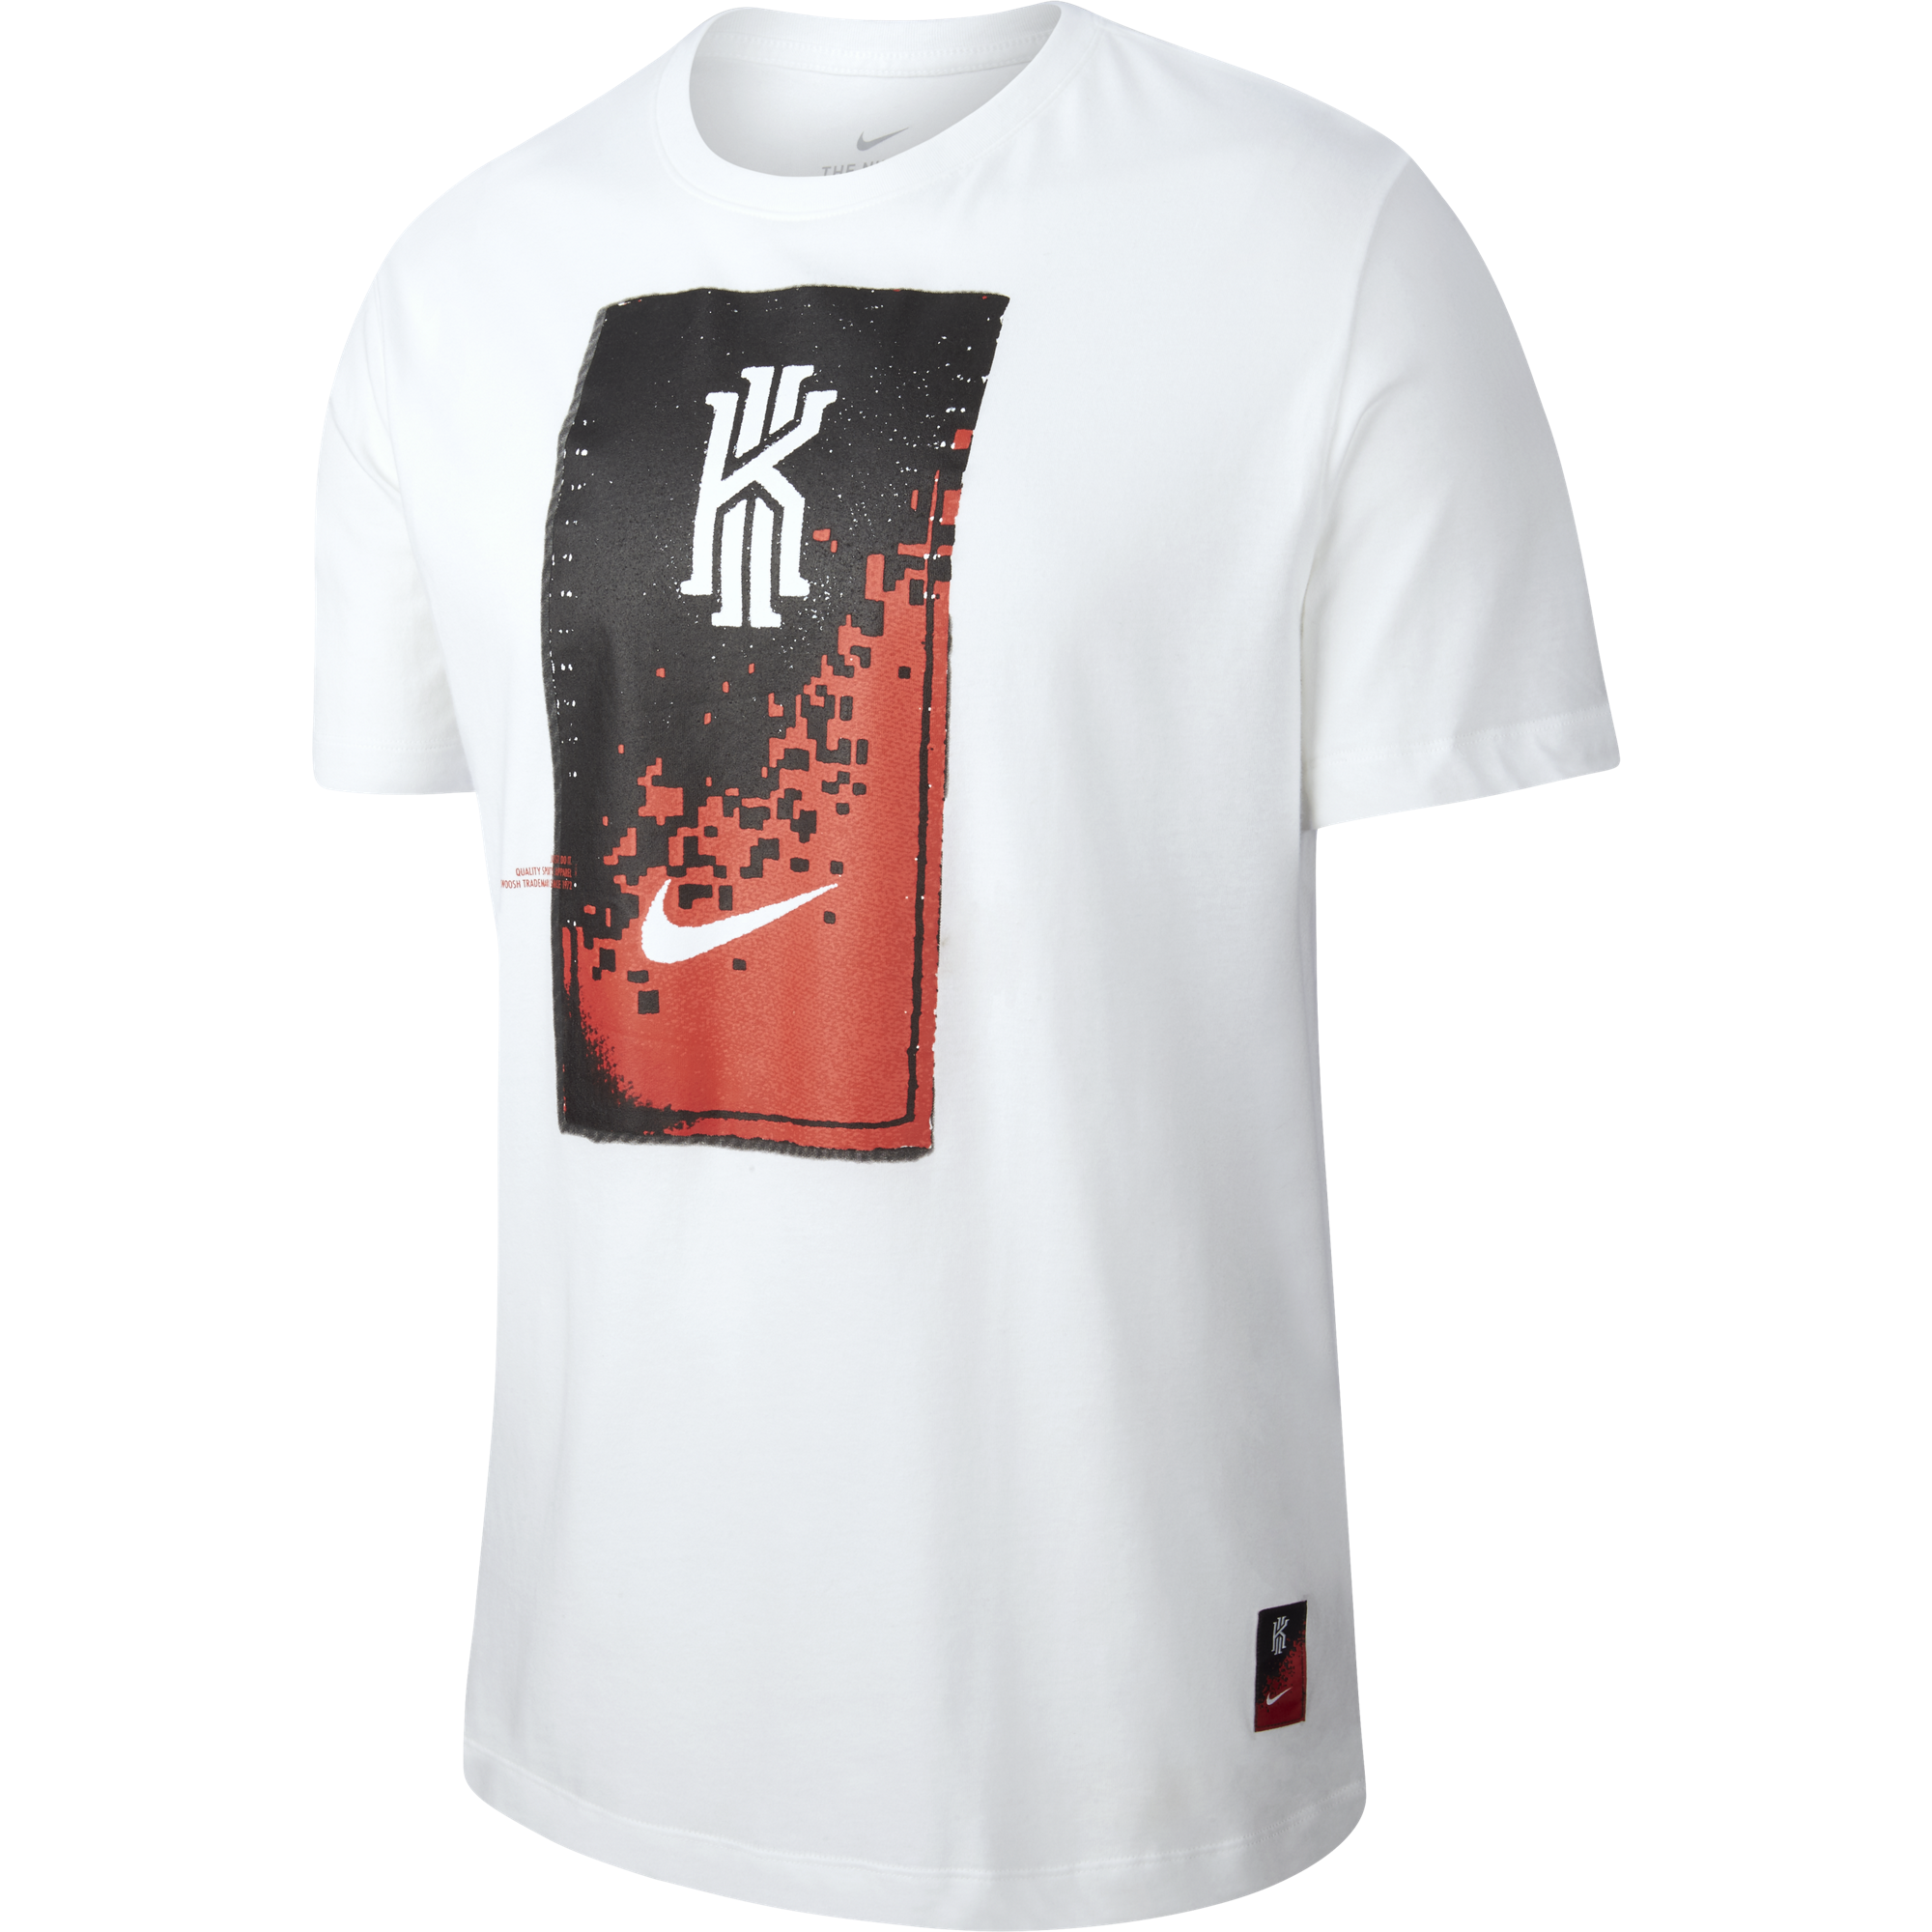 NIKE KYRIE DRY FIT TEE DF MIND for £30 